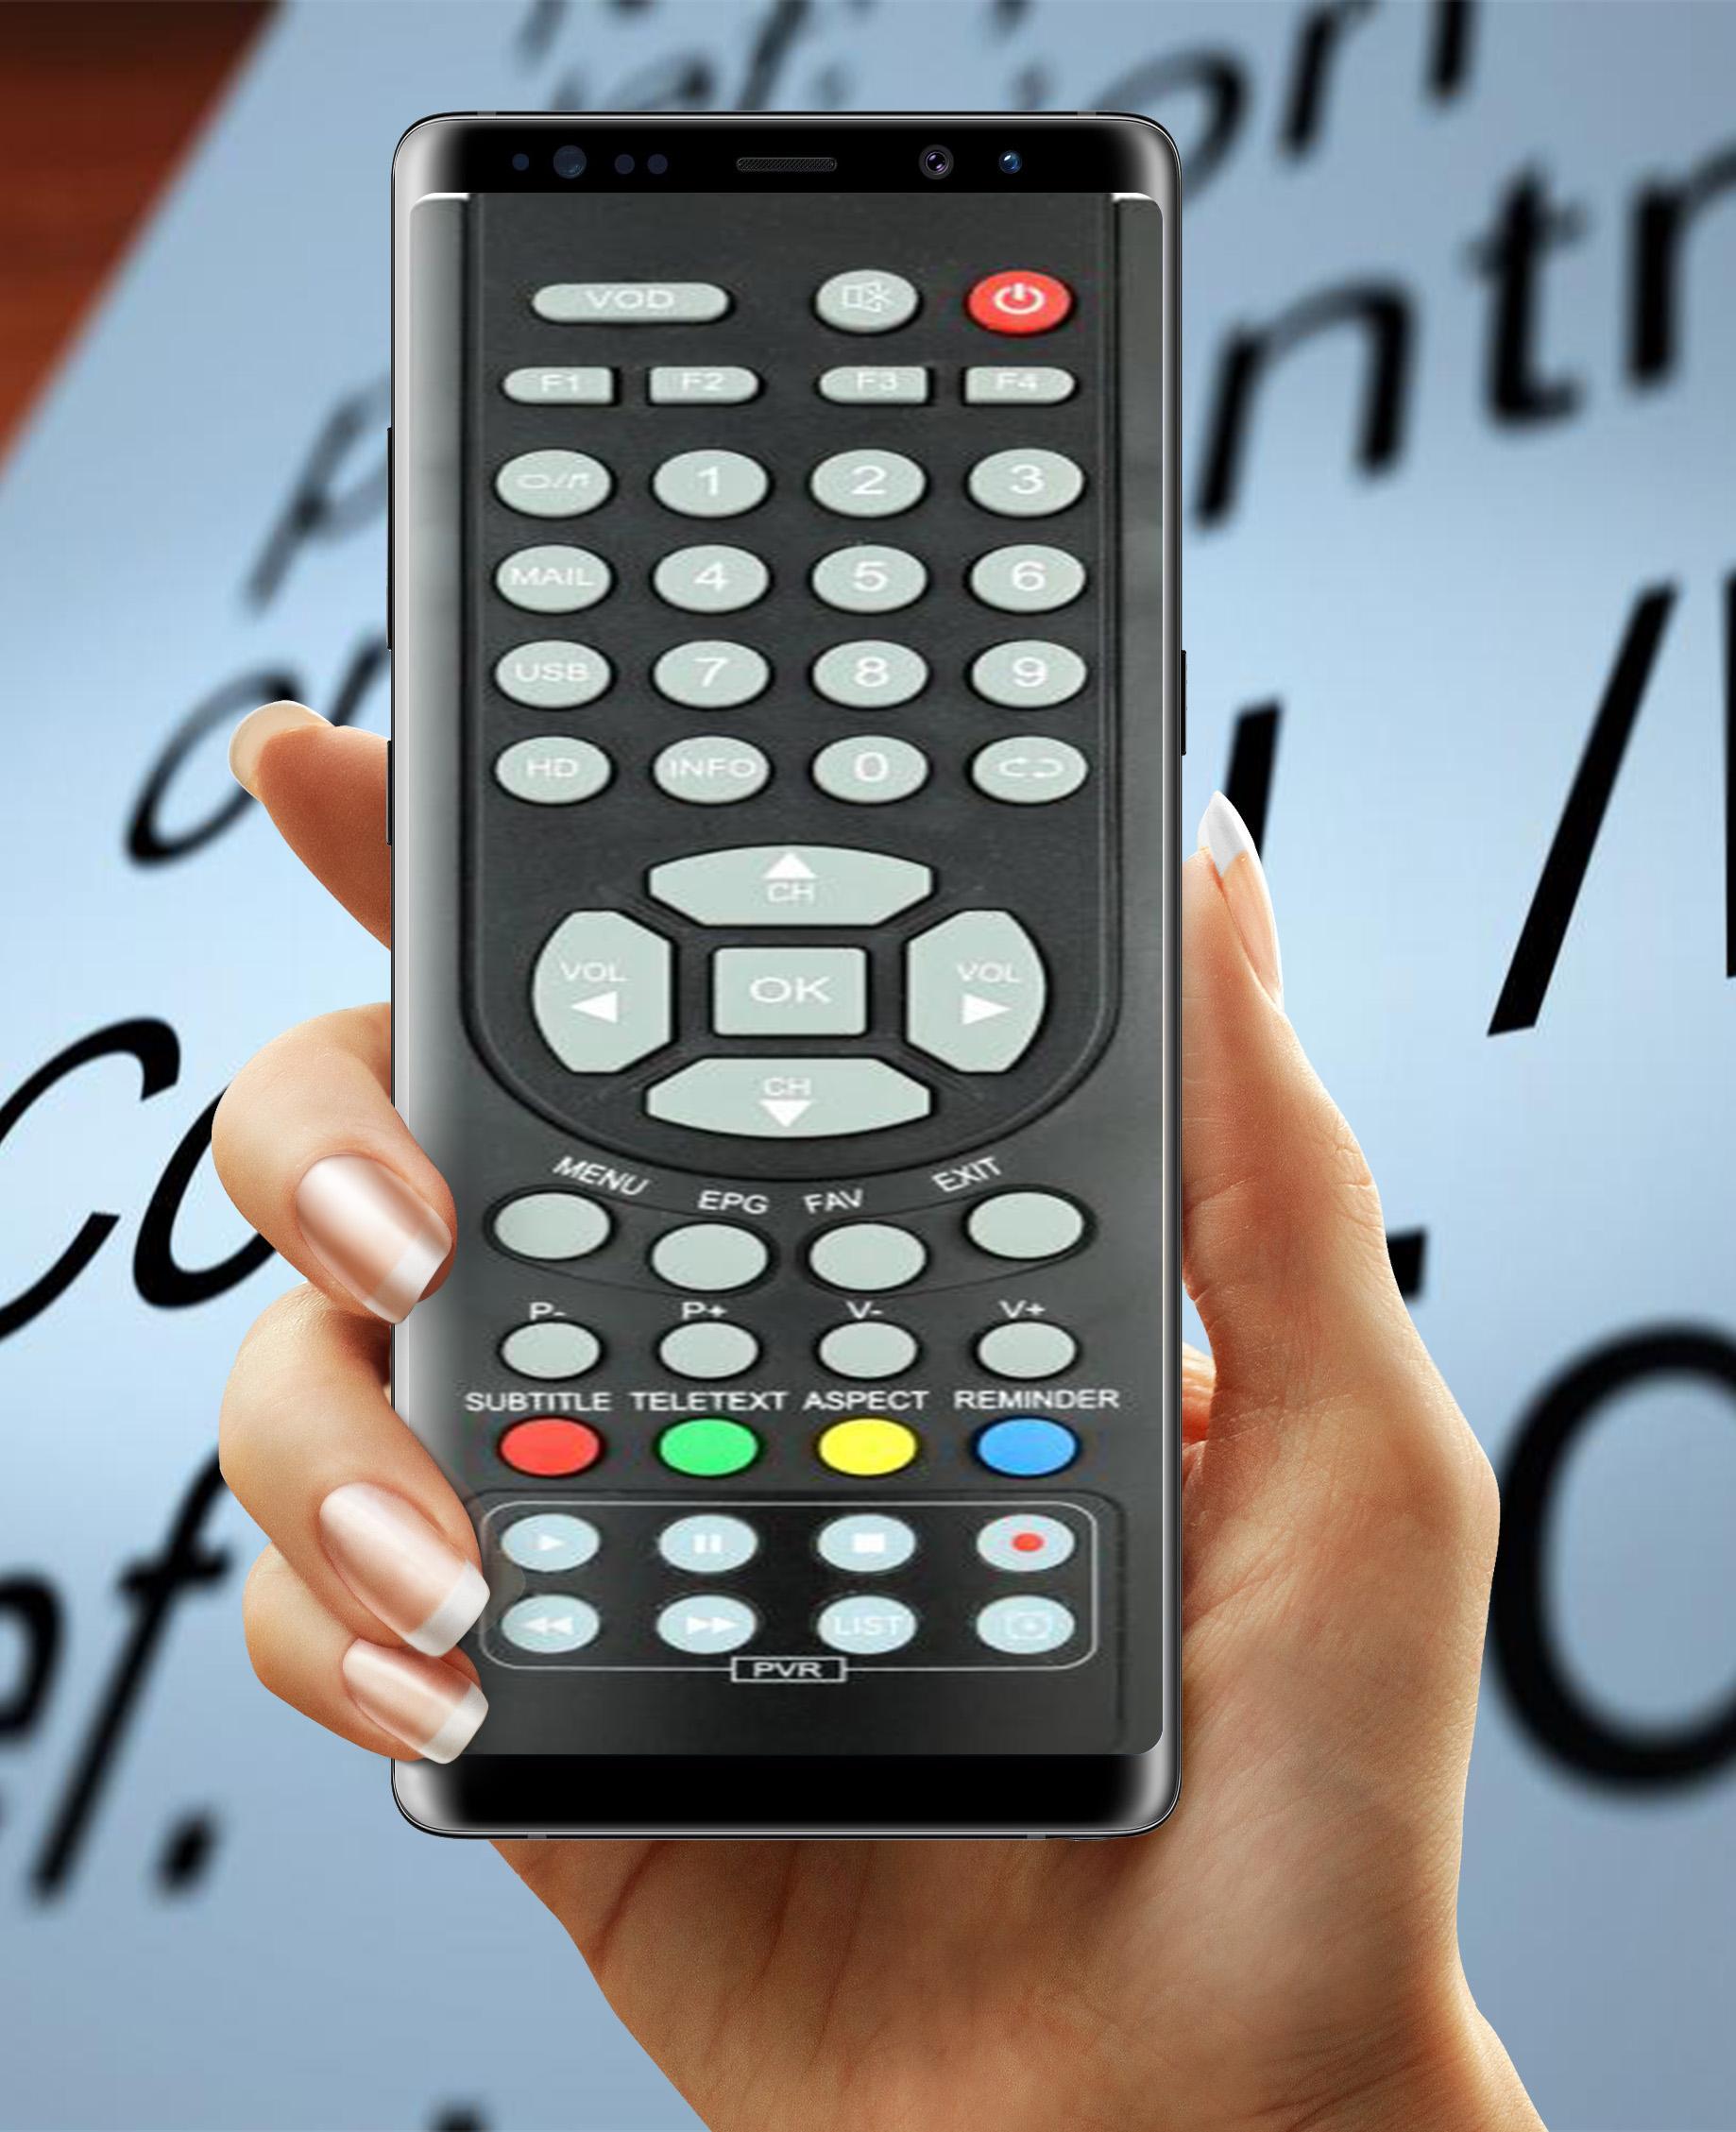 Remote Control For Samsung Tv for Android - APK Download